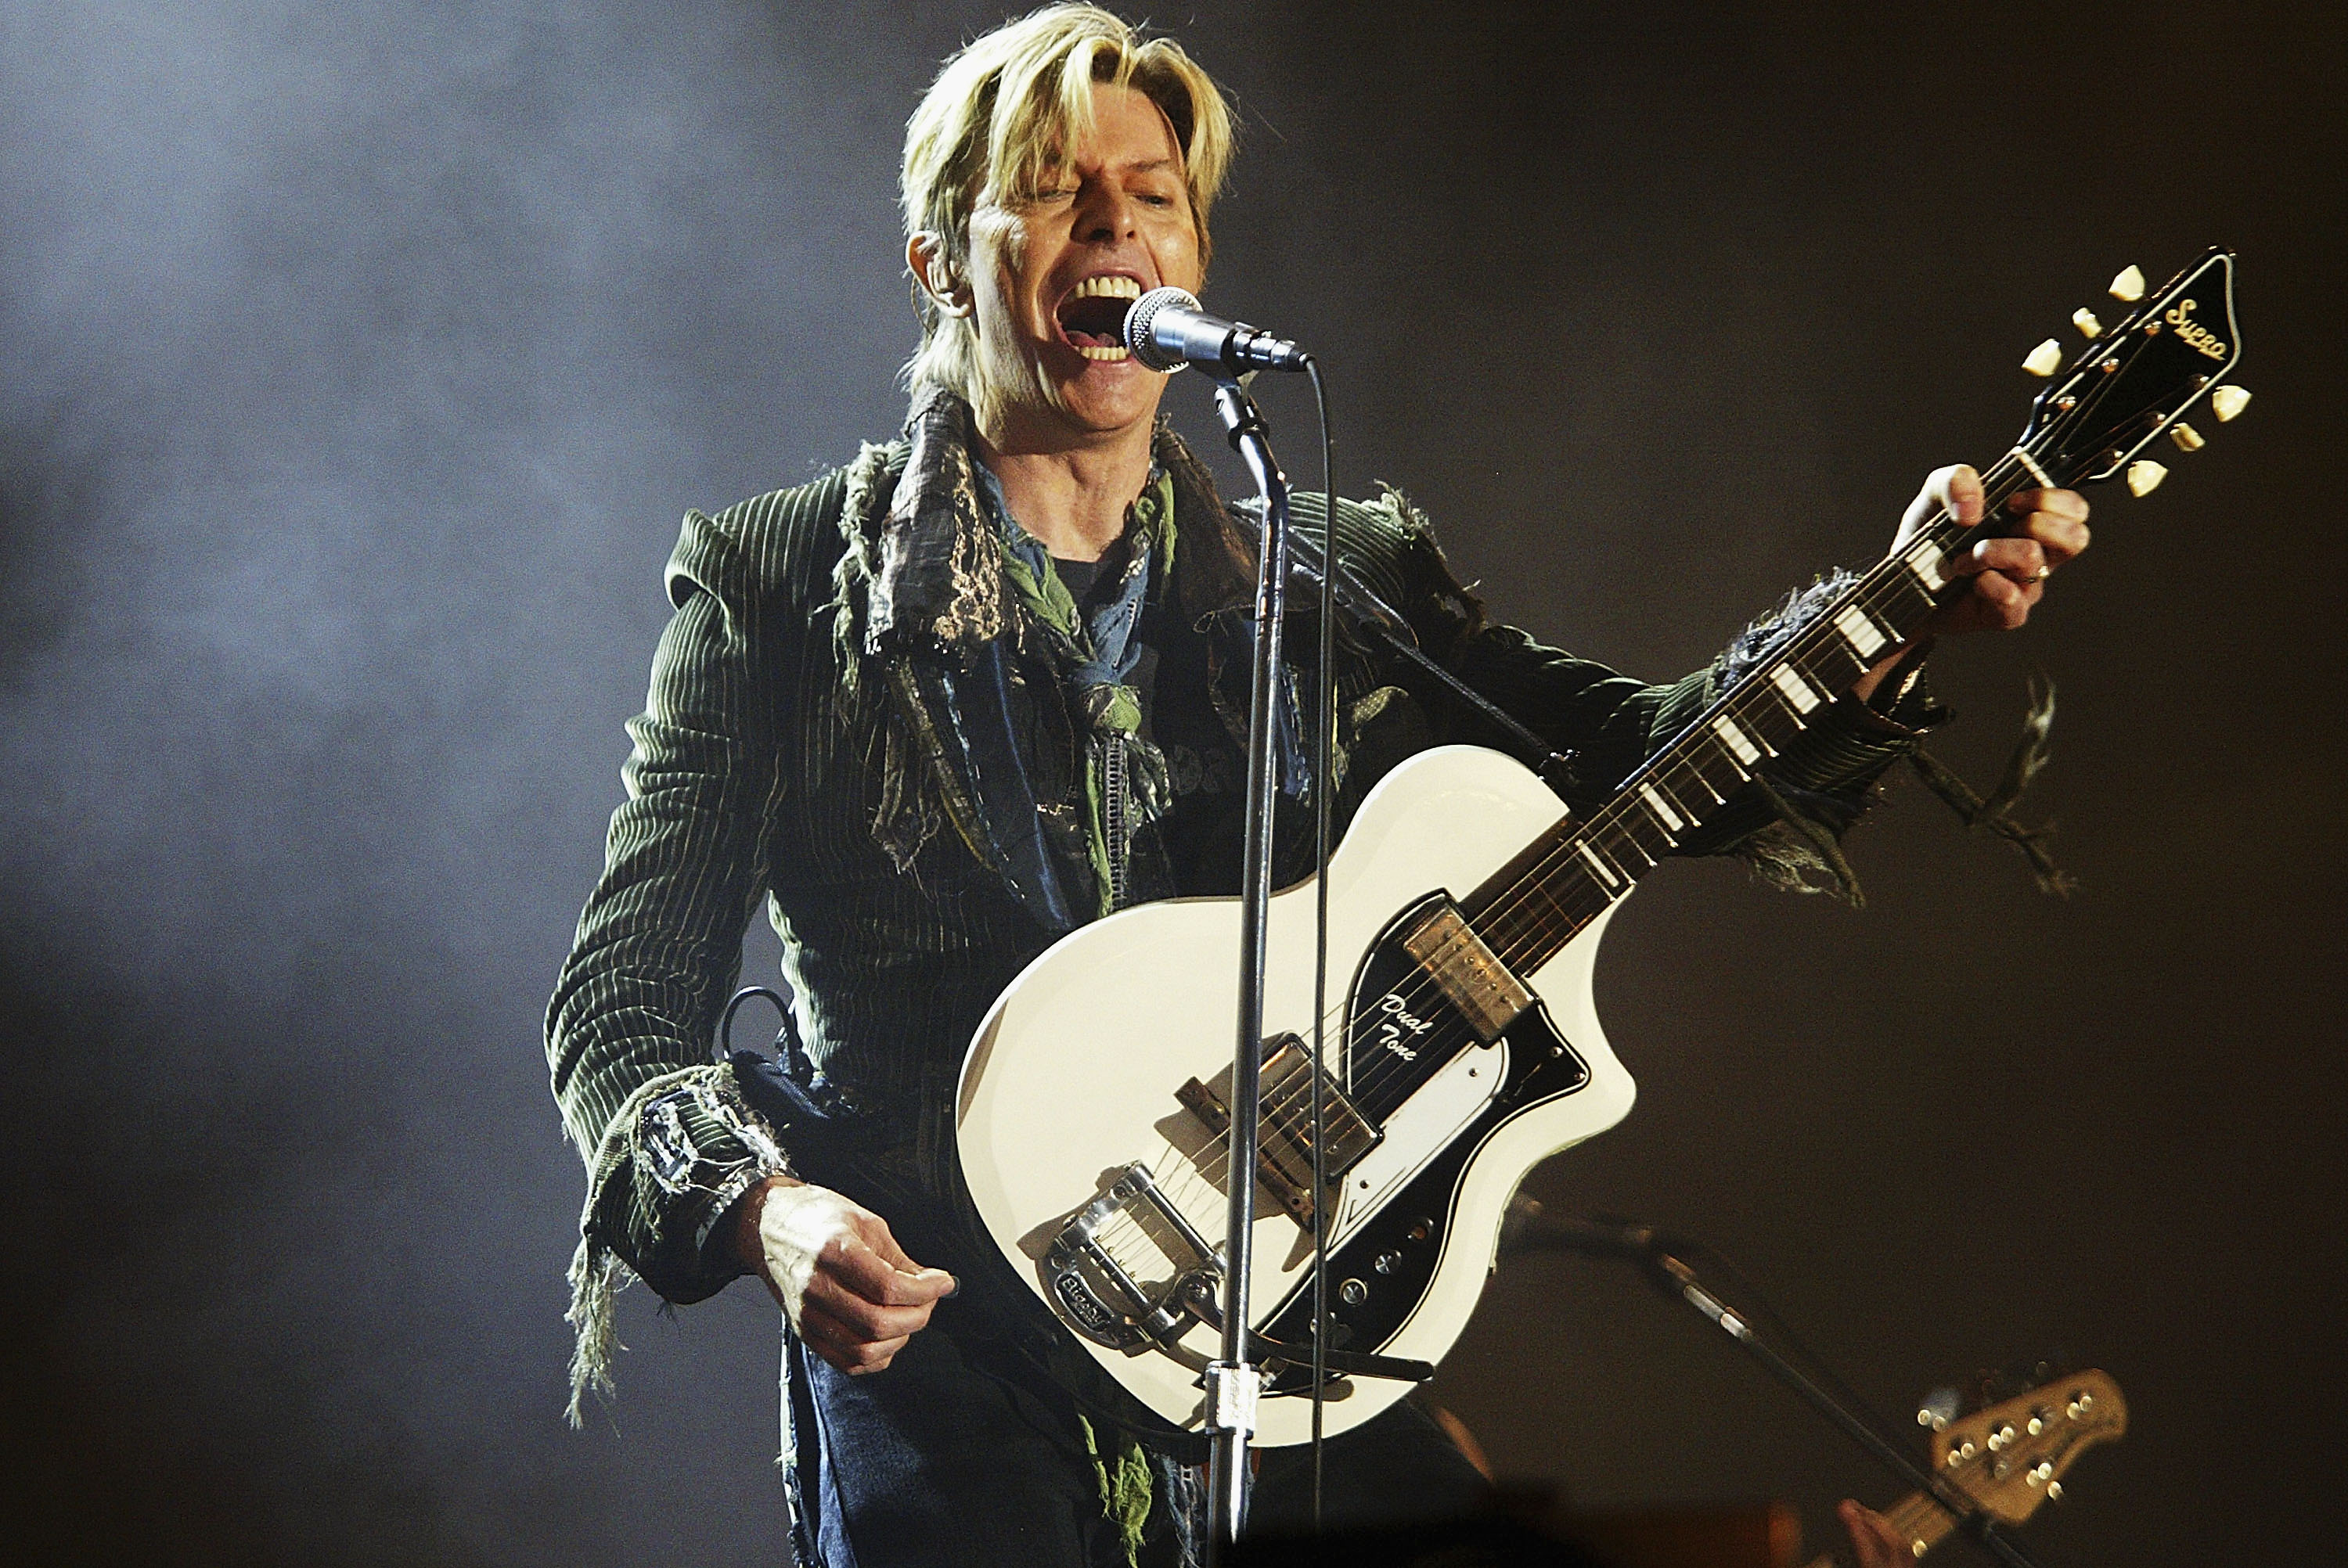 David Bowie performs on stage on the third and final day of "The Nokia Isle of Wight Festival 2004", on June 13, 2004 in Newport, UK. (Jo Hale—Getty Images)